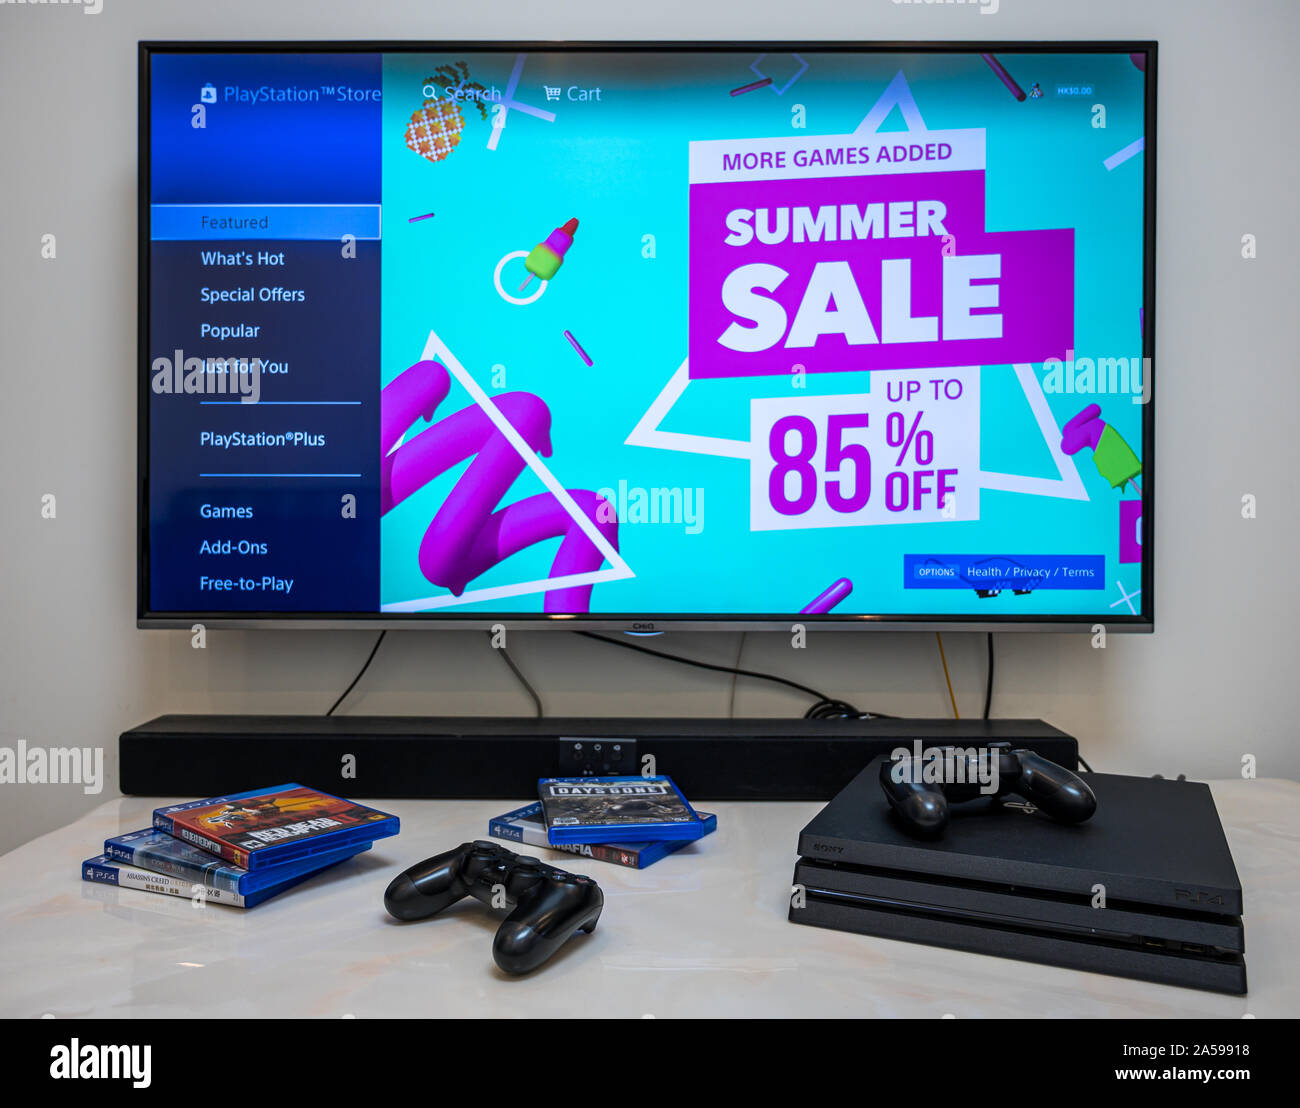 Ps4 Game High Resolution Stock Photography and Images - Alamy